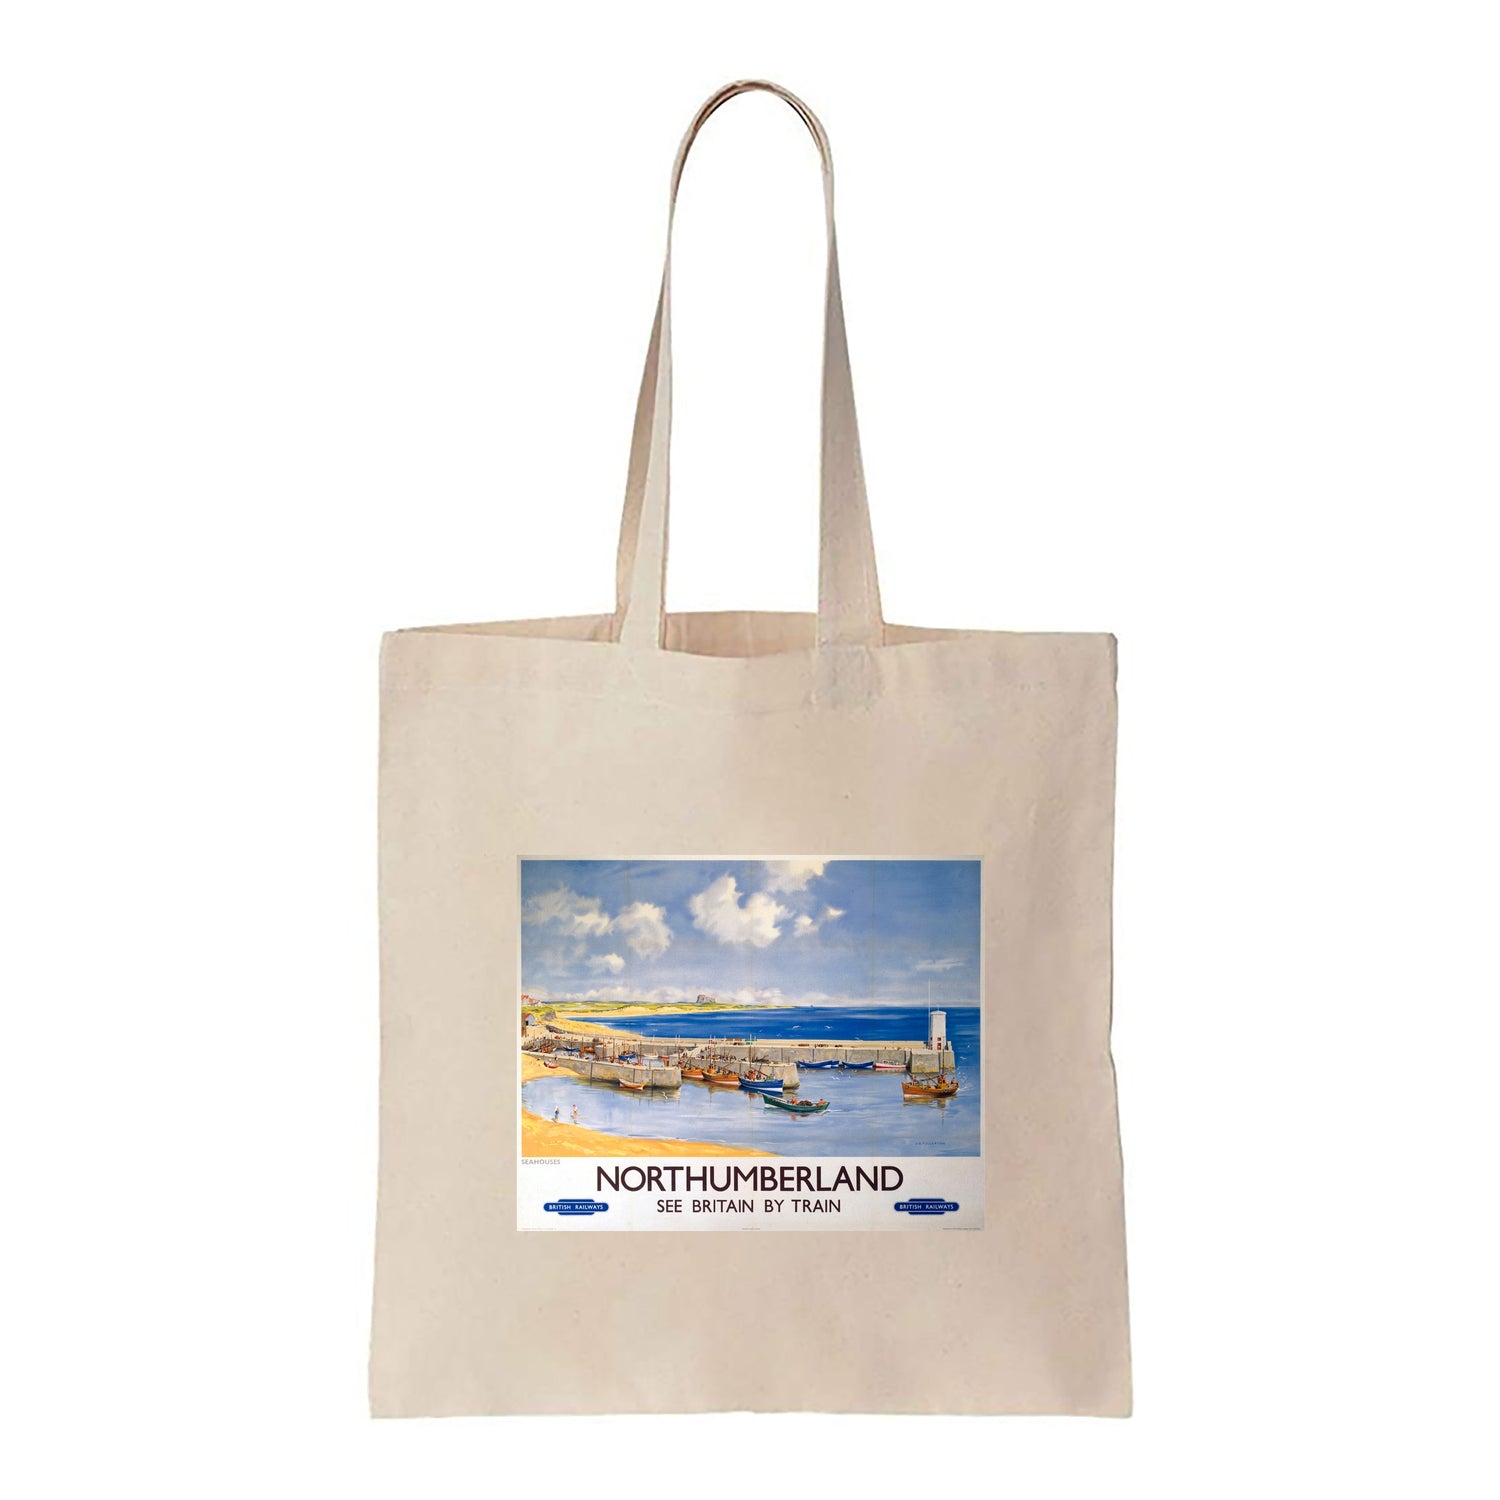 Northumberland, Seahouses - Canvas Tote Bag